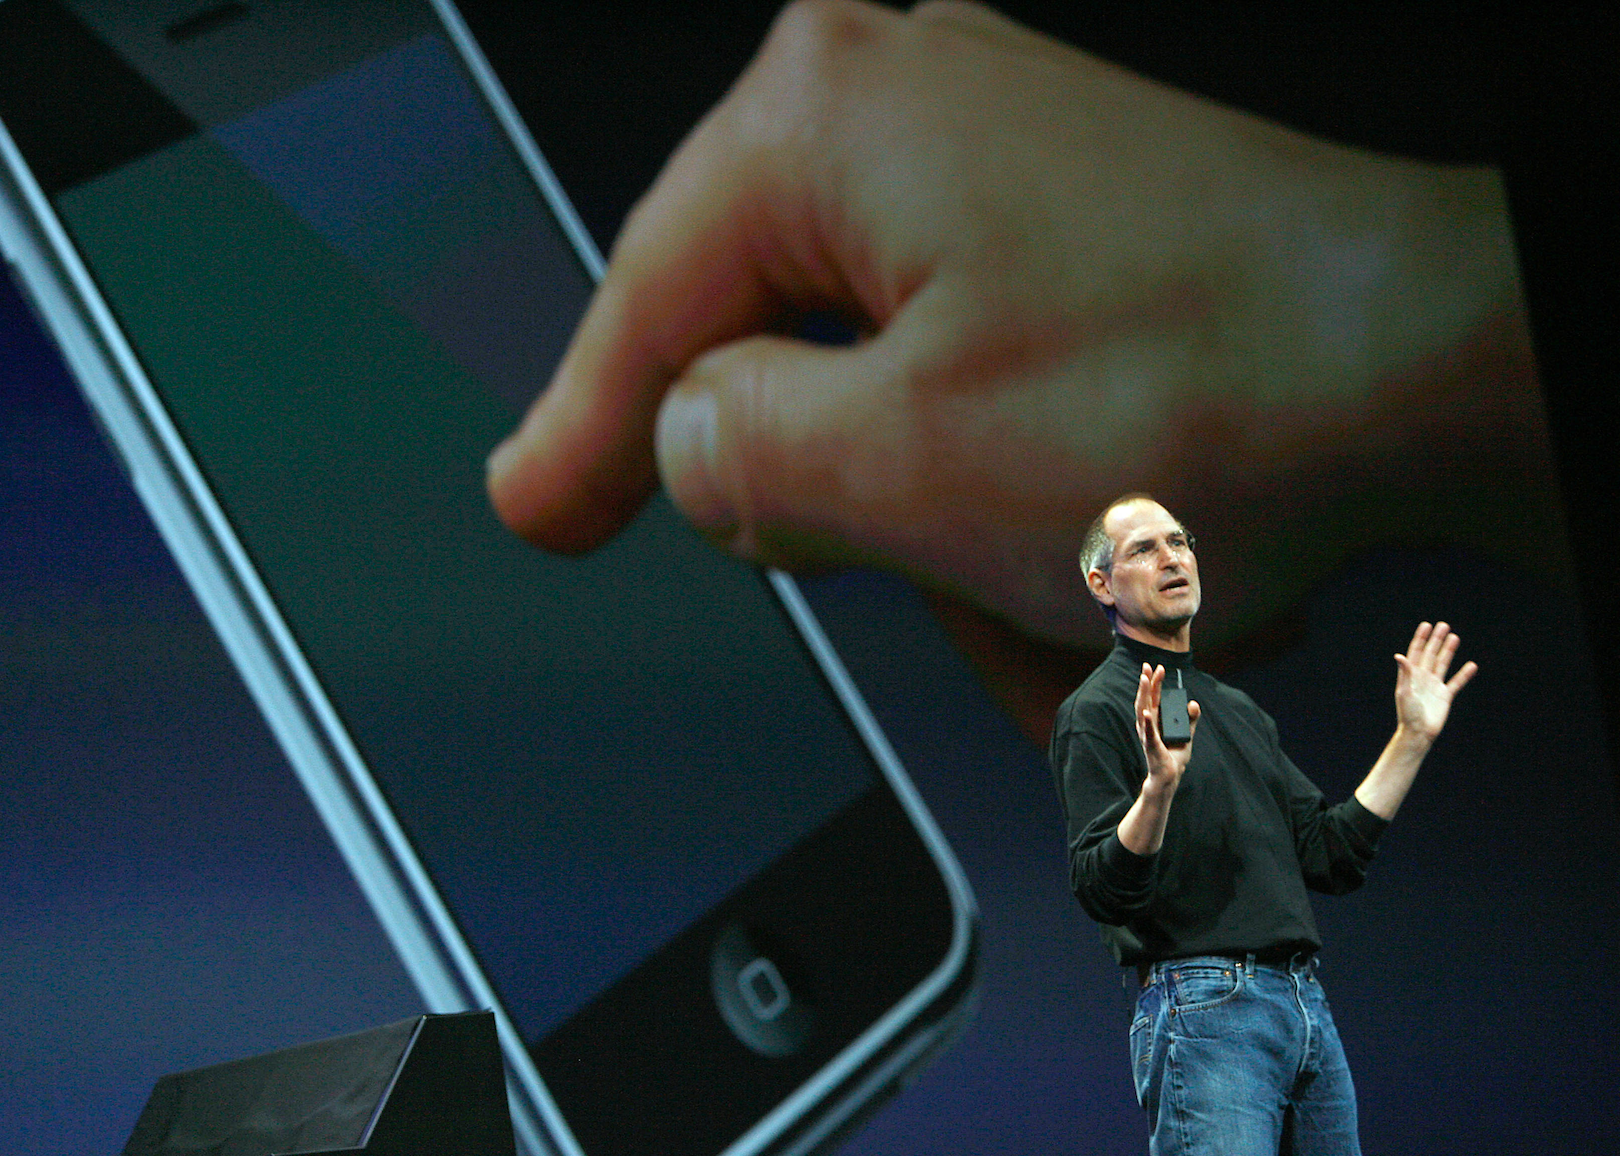 Steve Jobs in a black turtleneck and jeans onstage in front of the iphone.